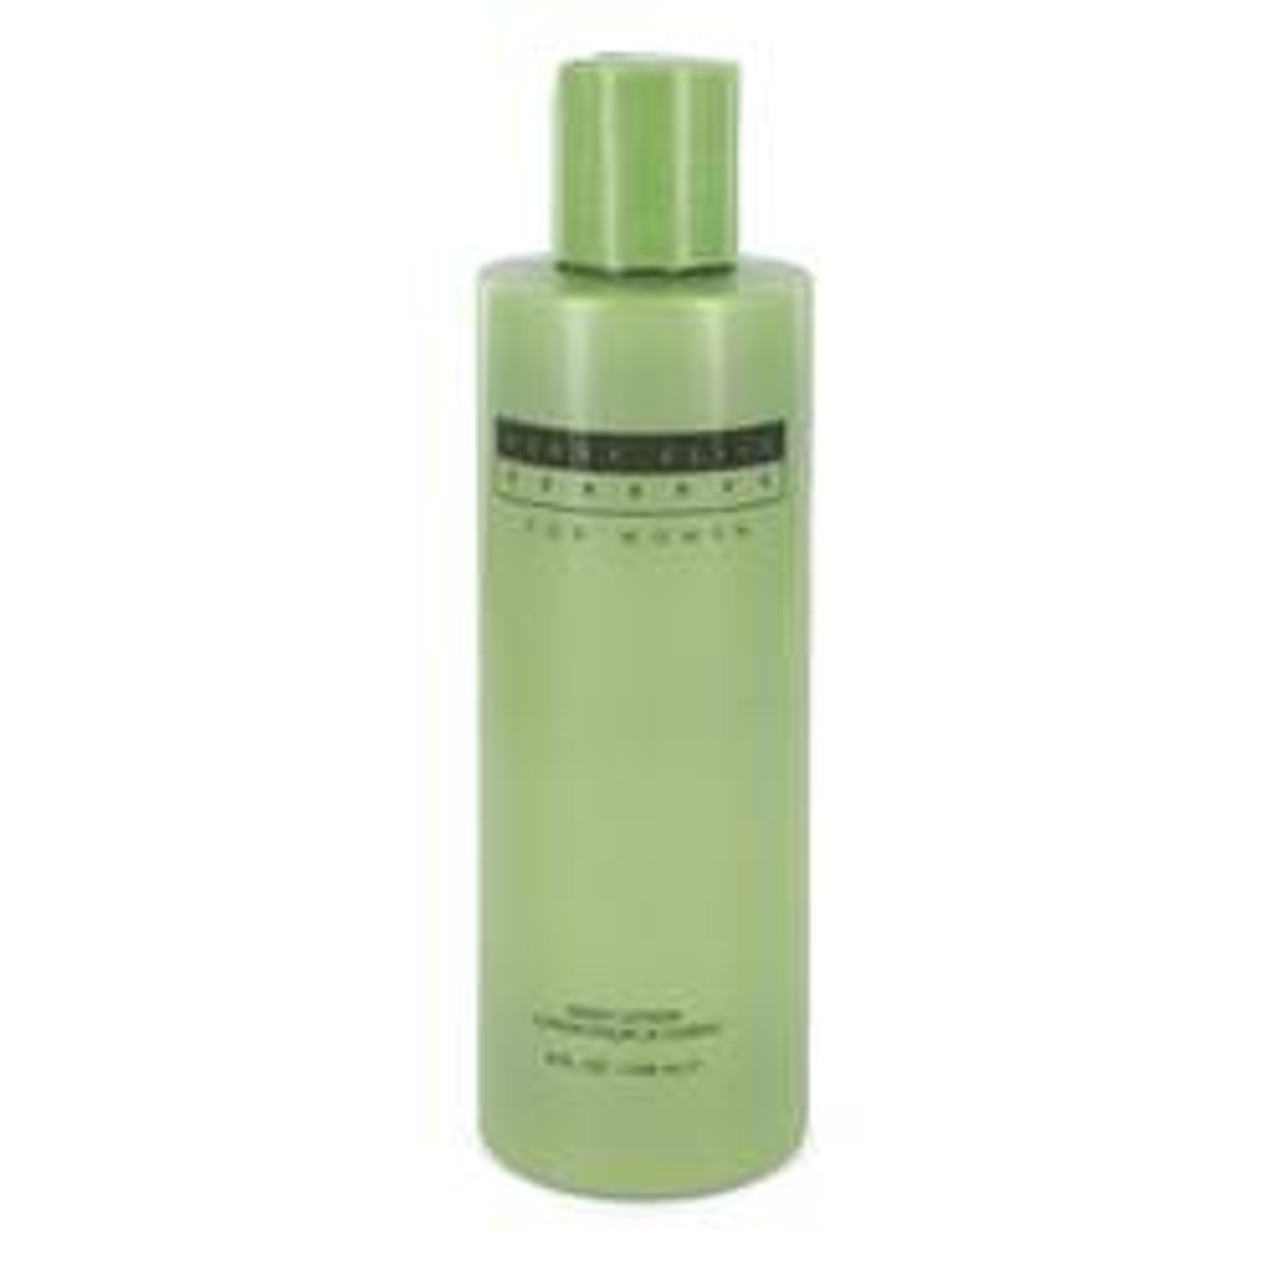 Perry Ellis Reserve Perfume By Perry Ellis Body Lotion 8 oz for Women - [From 39.00 - Choose pk Qty ] - *Ships from Miami